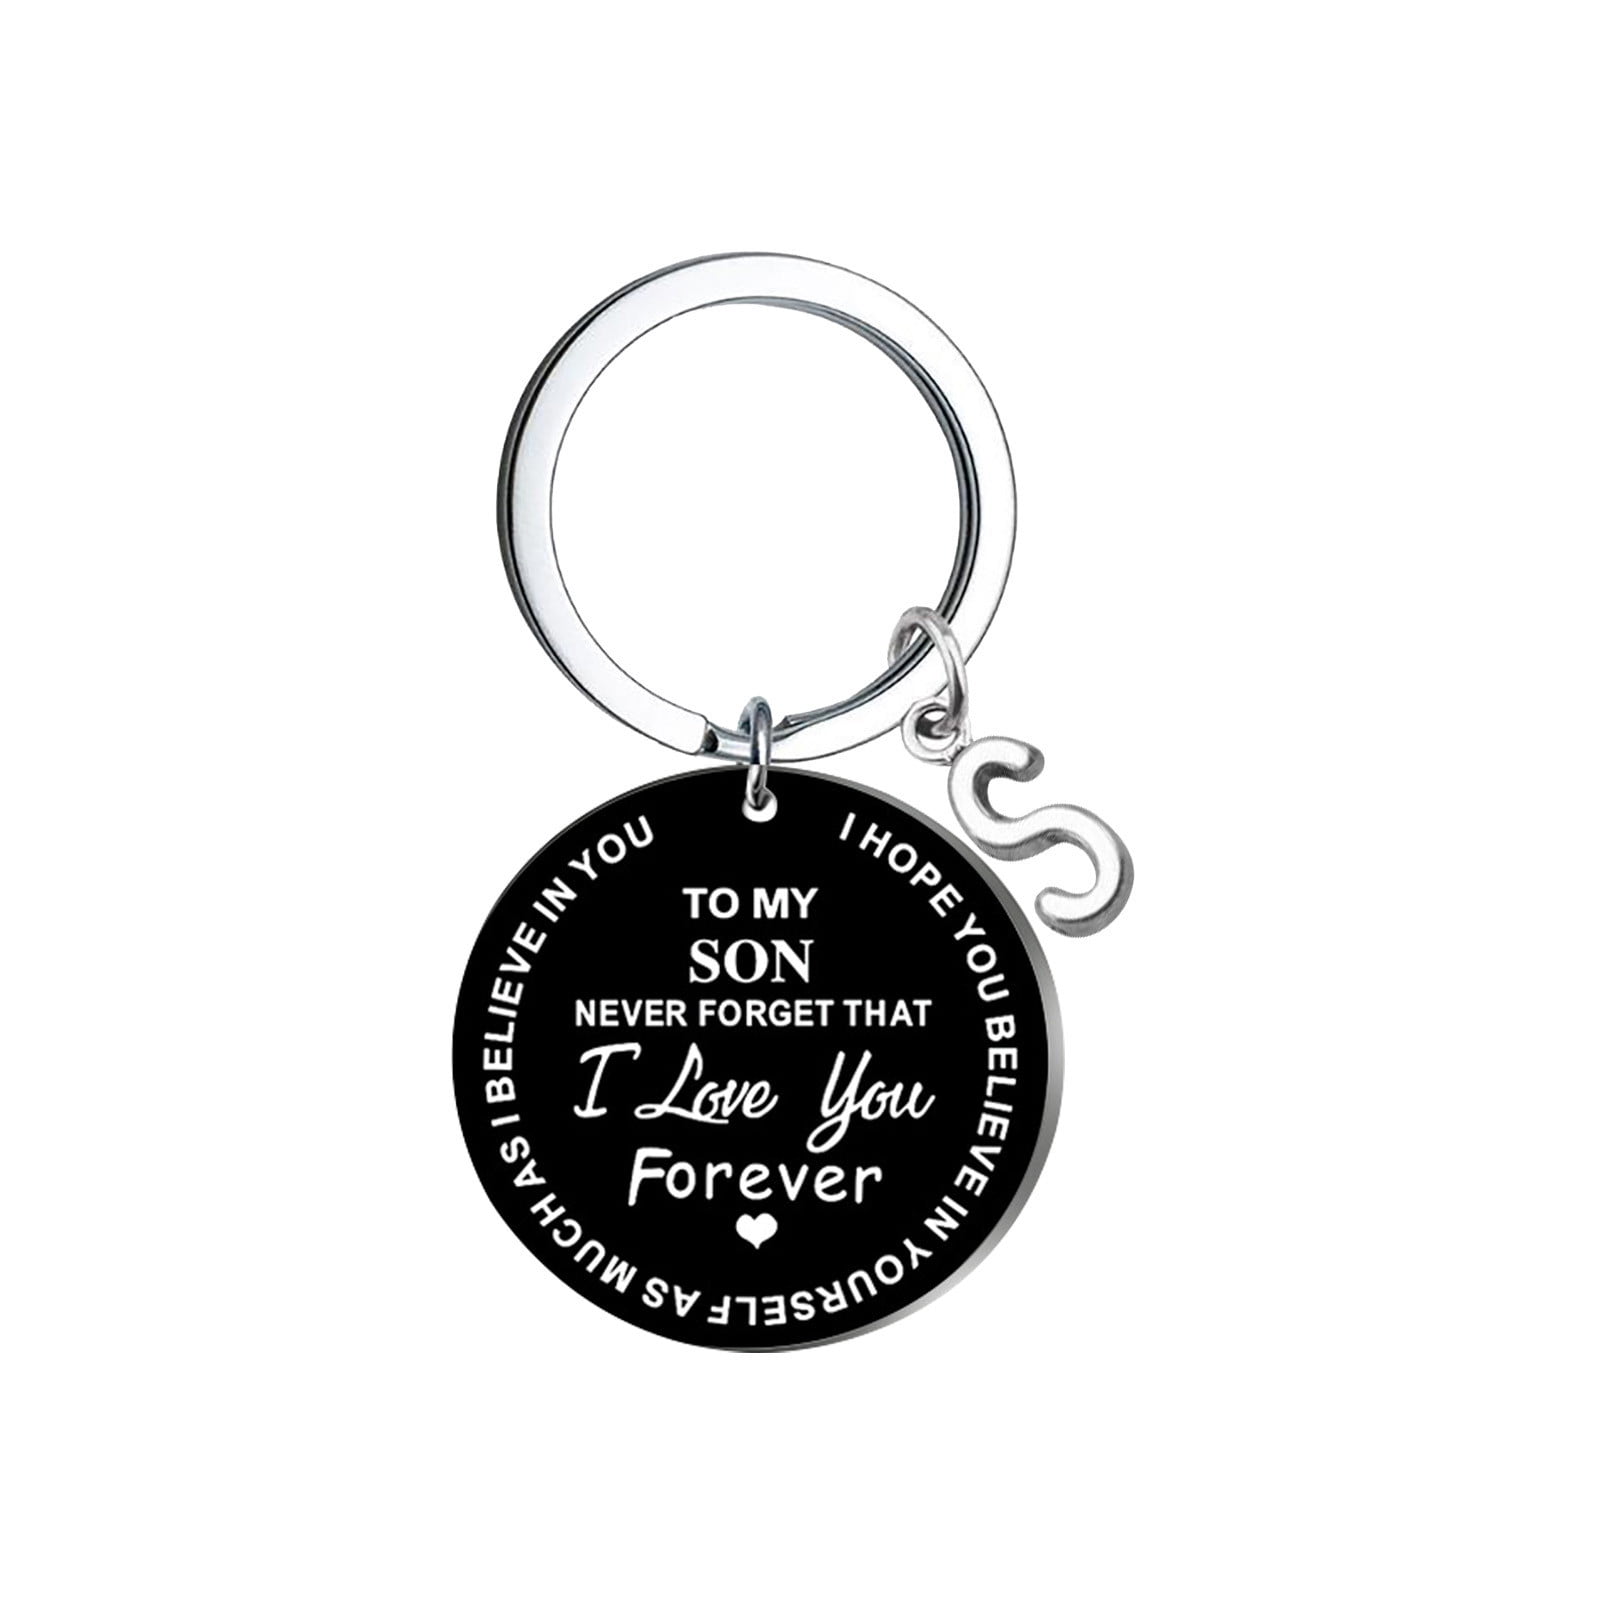 Stainless Steel Handmade Black Adjustable Cord Inspirational Quote Never Forget That I Love You Life Is To My Bonus Dad From Bonus Son